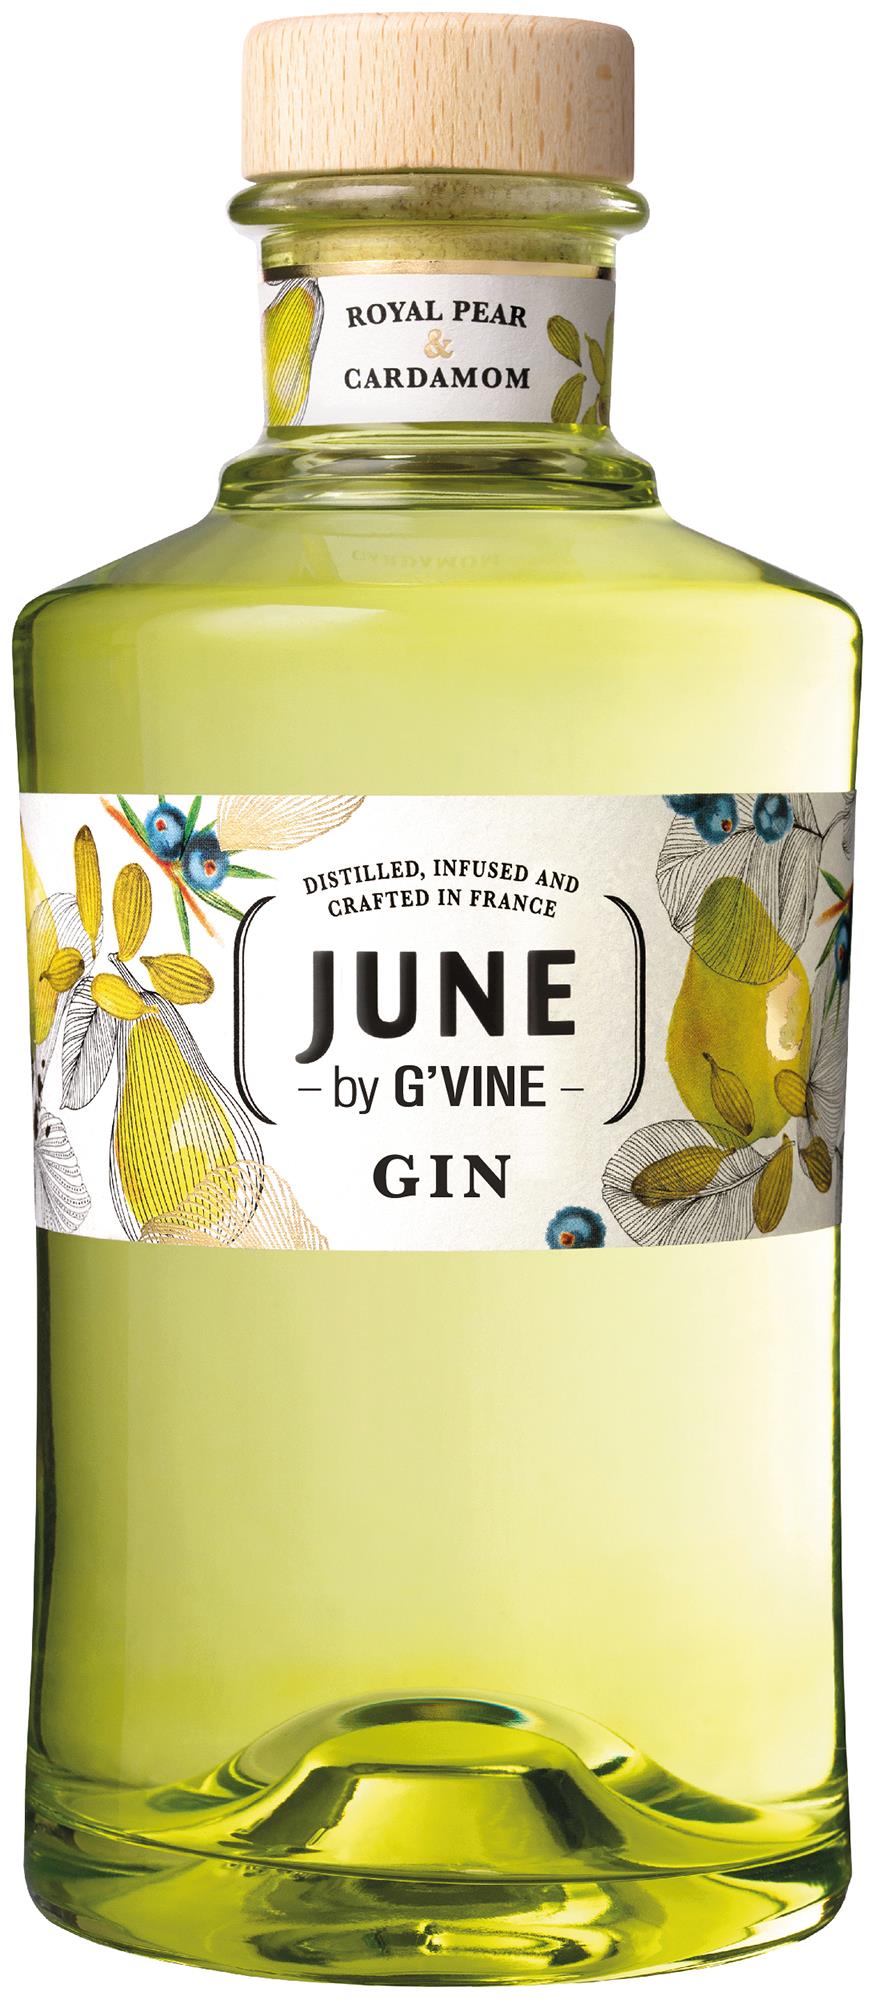 JUNE BY G VINE GIN 37,5% PEAR AND CARDAMOM, MAISON VILLEVERT (70CL)